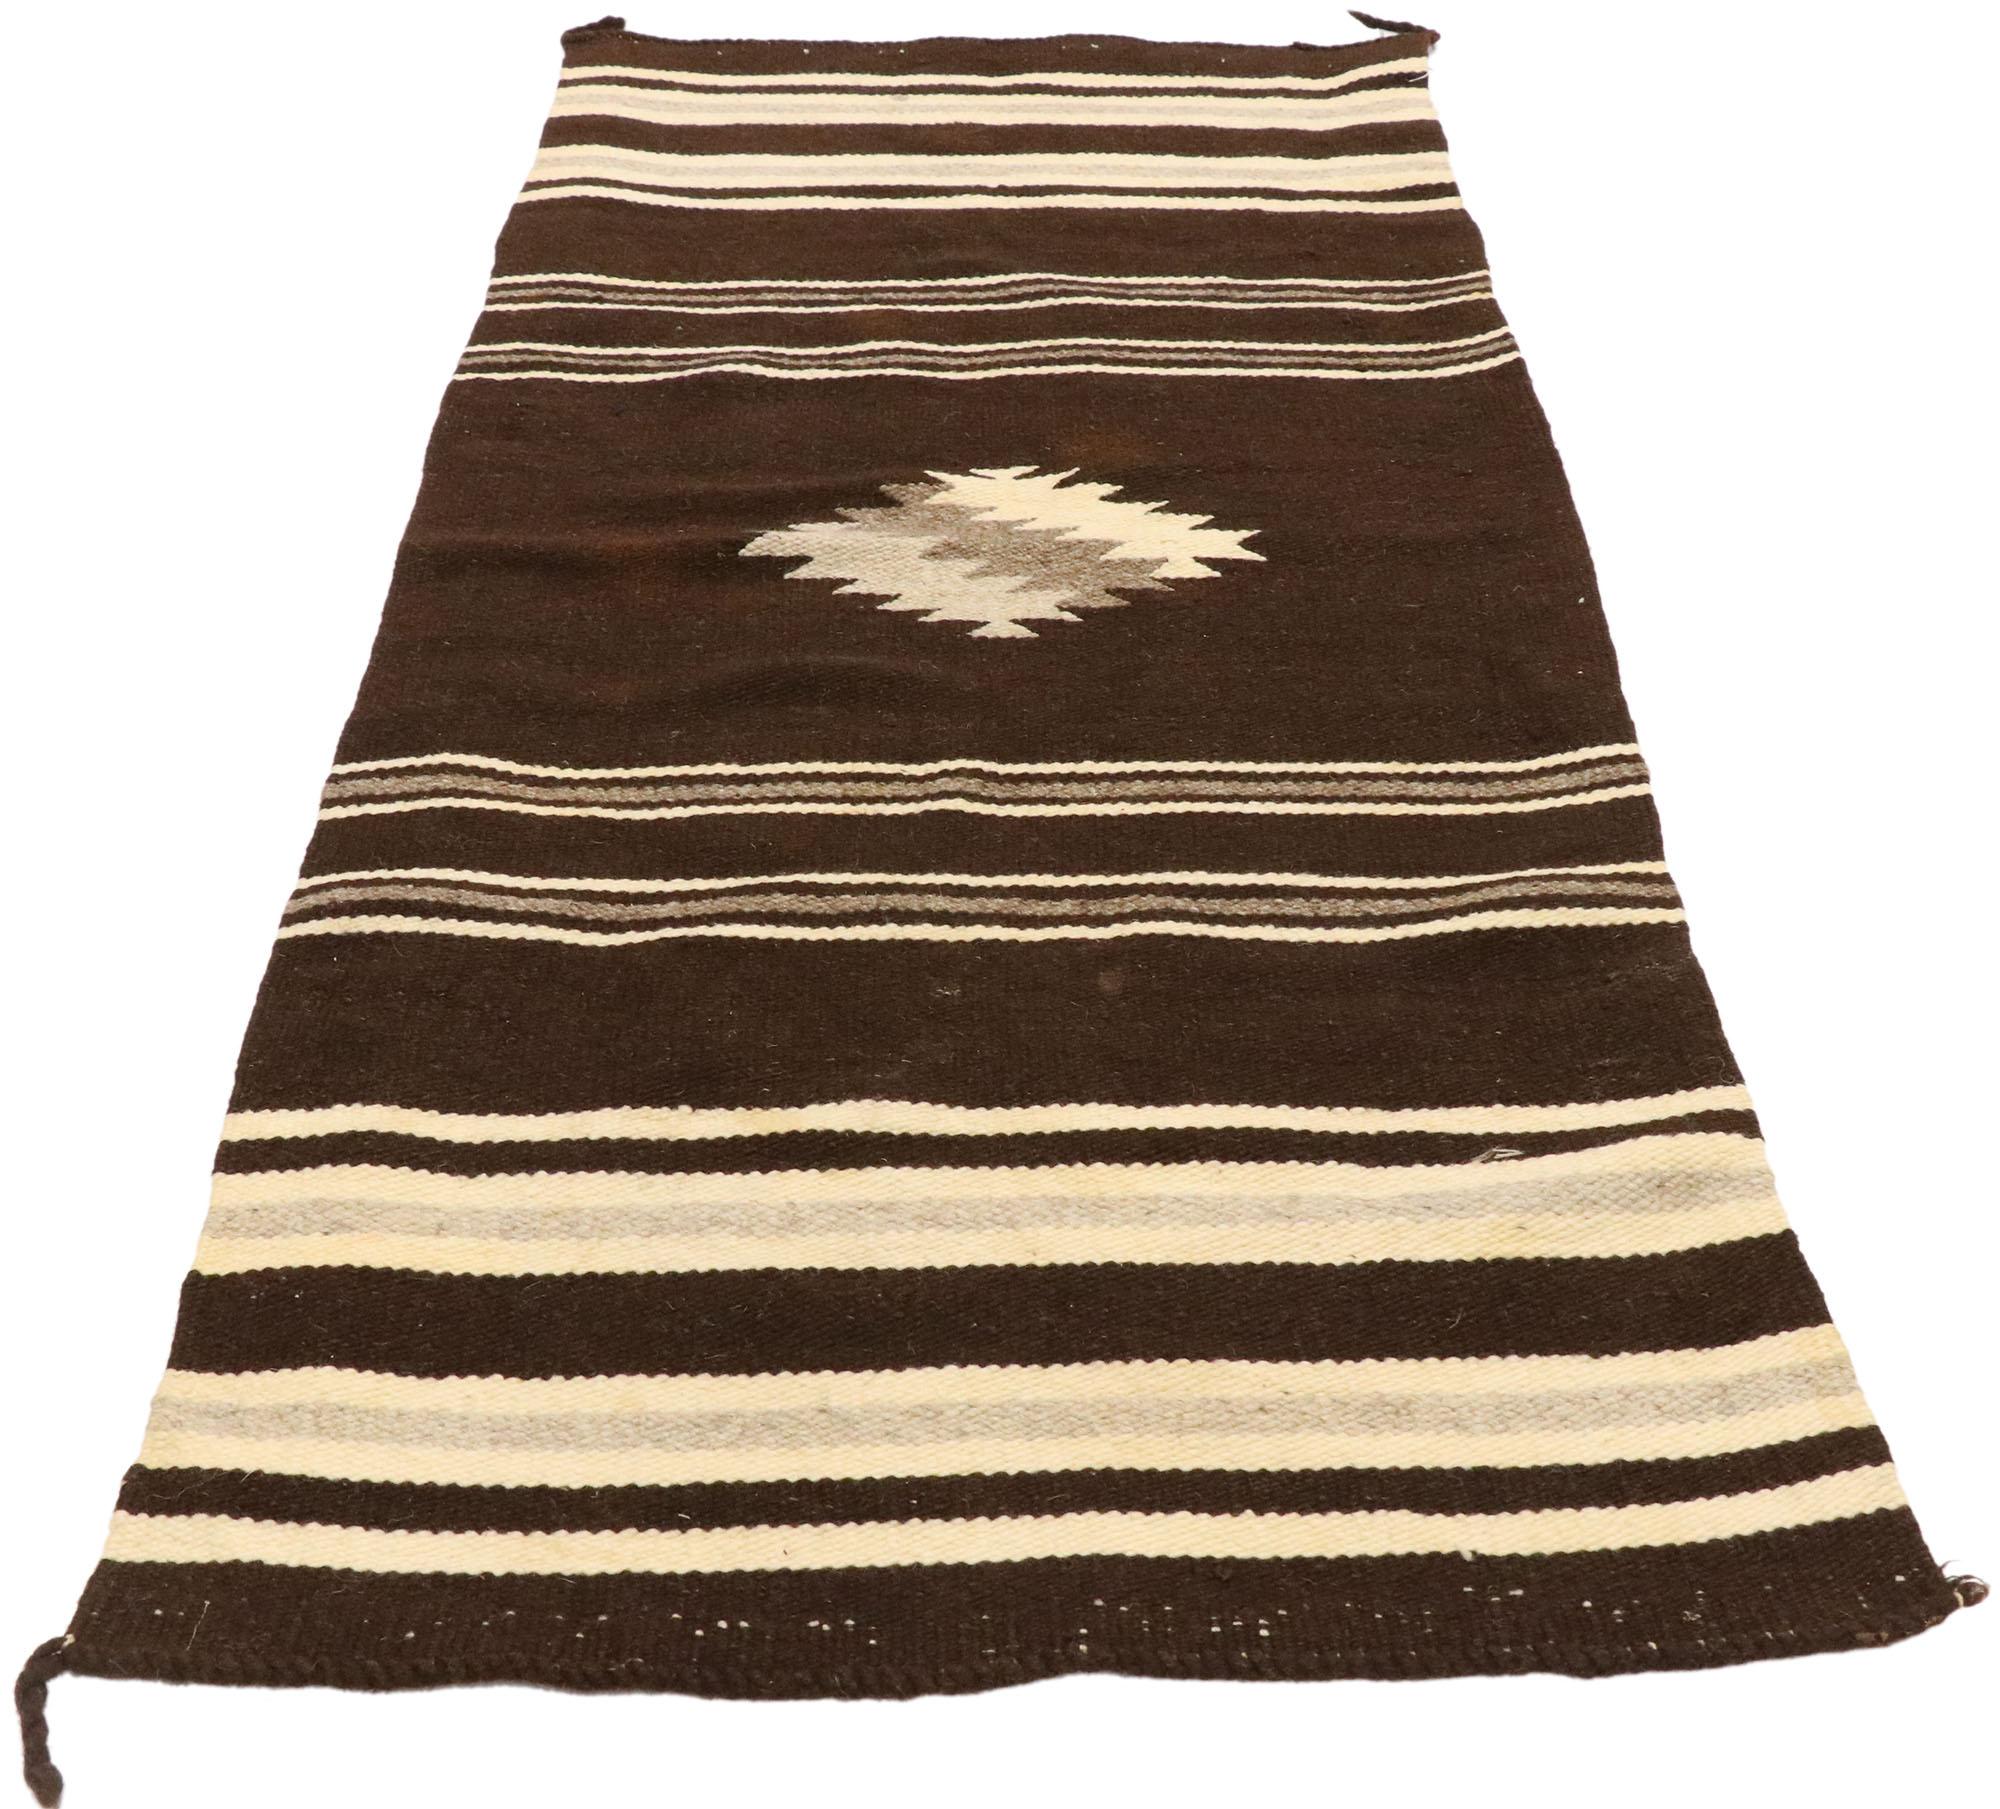 Hand-Woven Vintage Navajo Kilim Rug with Native American Style and Two Grey Hills Vibes